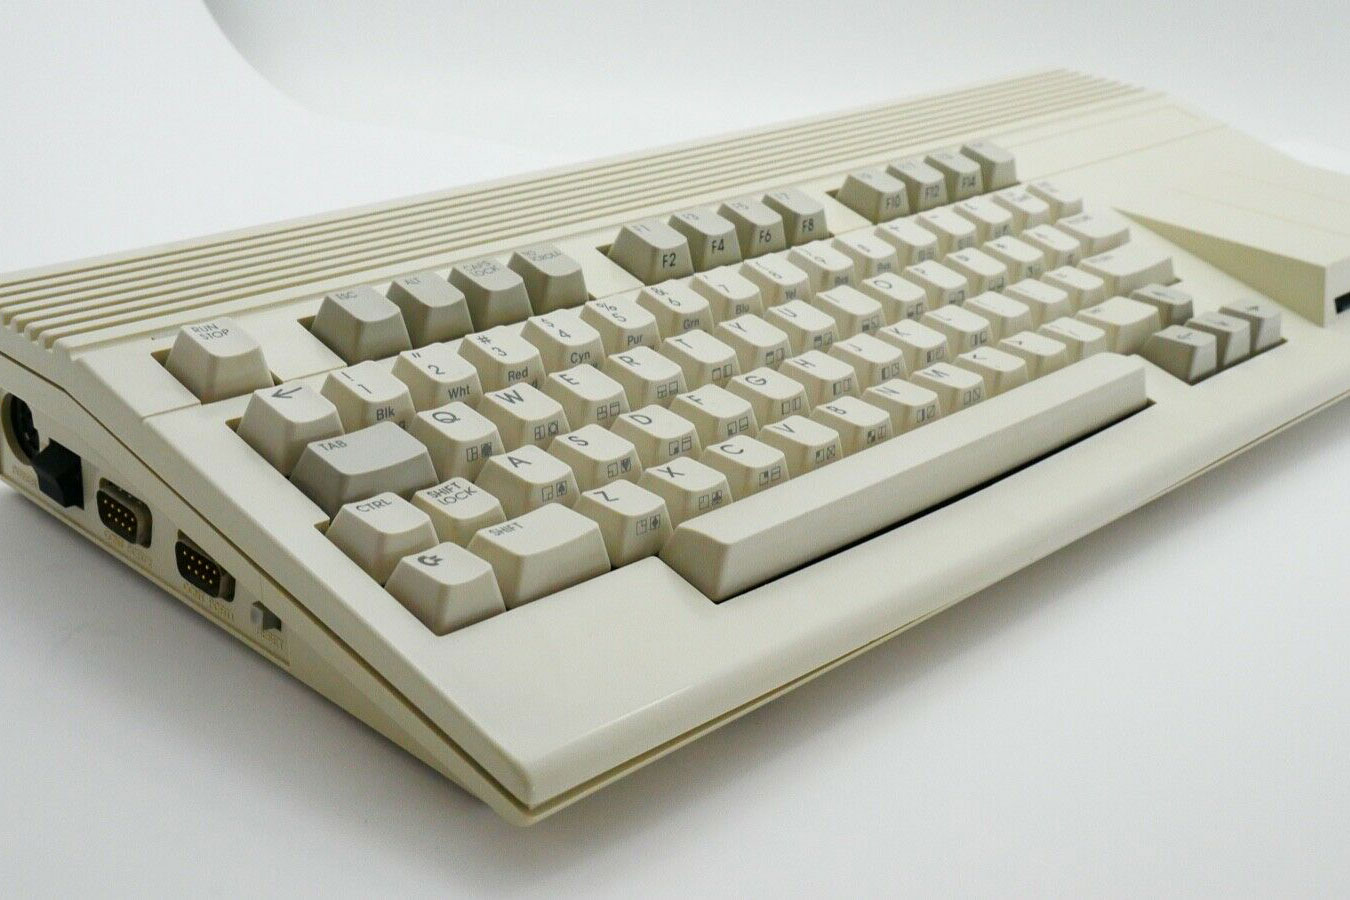 A working Commodore 65 PC with keyboard on a desk.